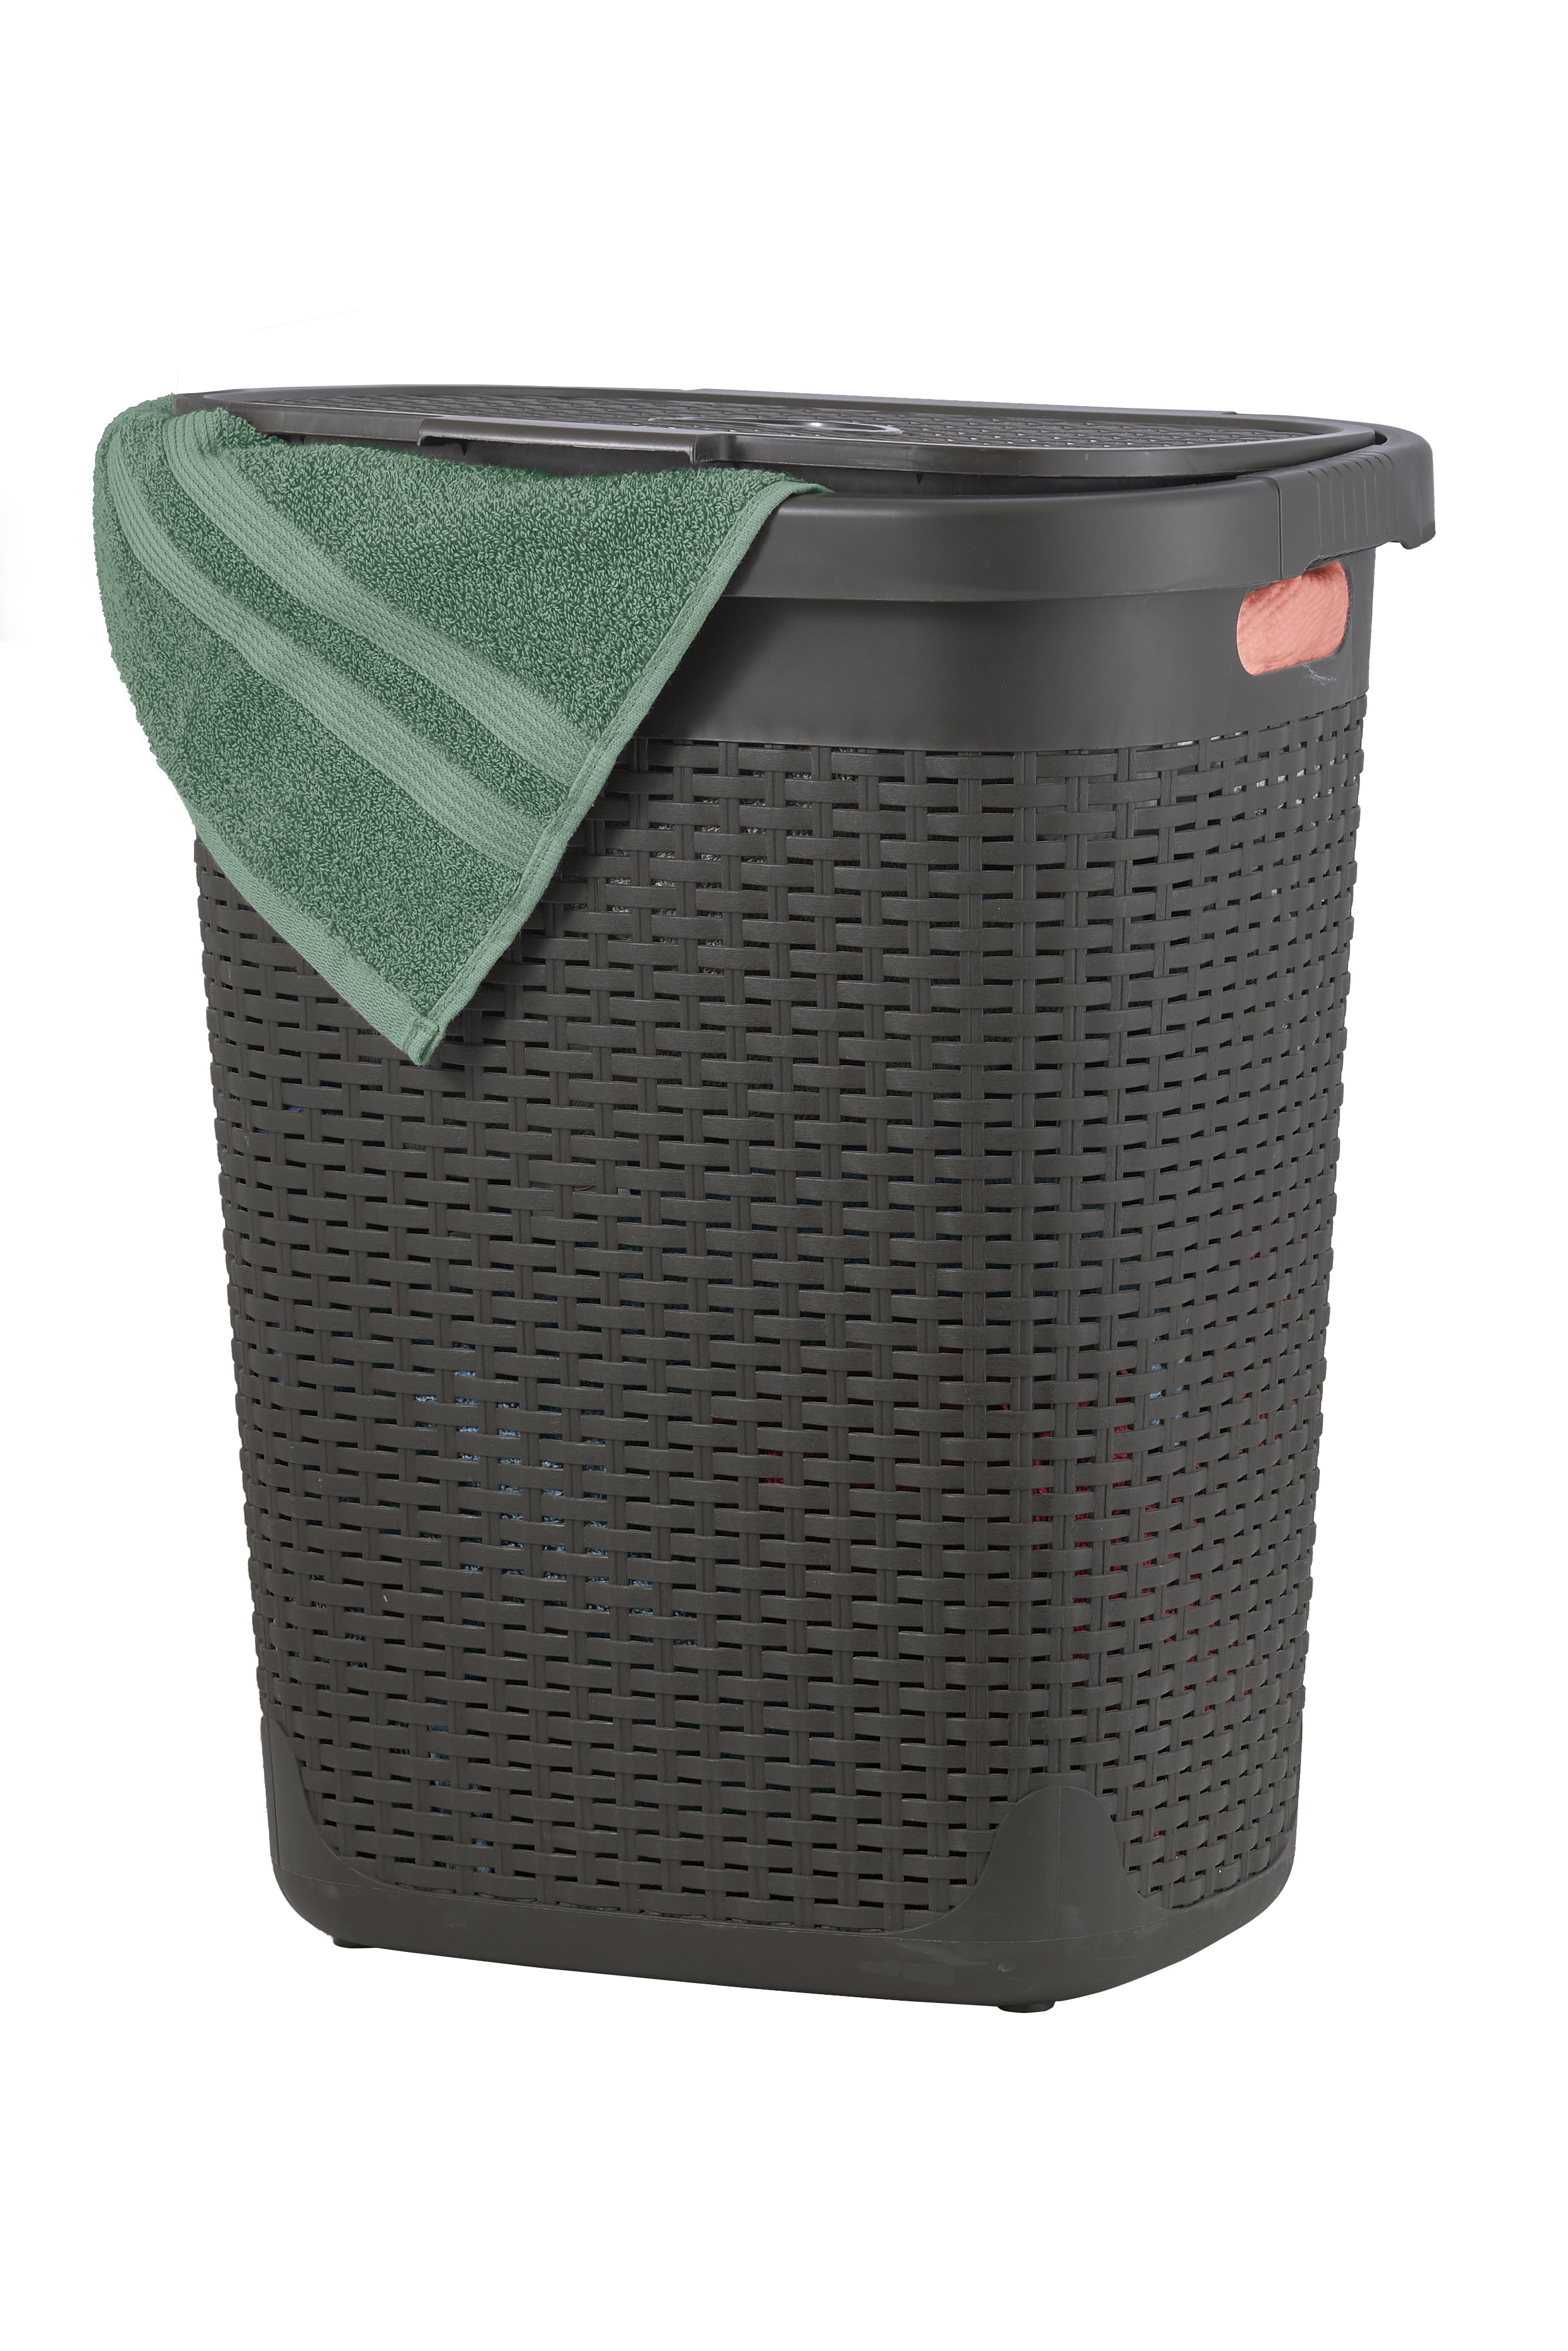 Brown-Grey Mabel Home Plastic Laundry Hamper with Lid Large Laundry Basket Extra Trash Bin 1,6 Gallons inc. 2 Sections 